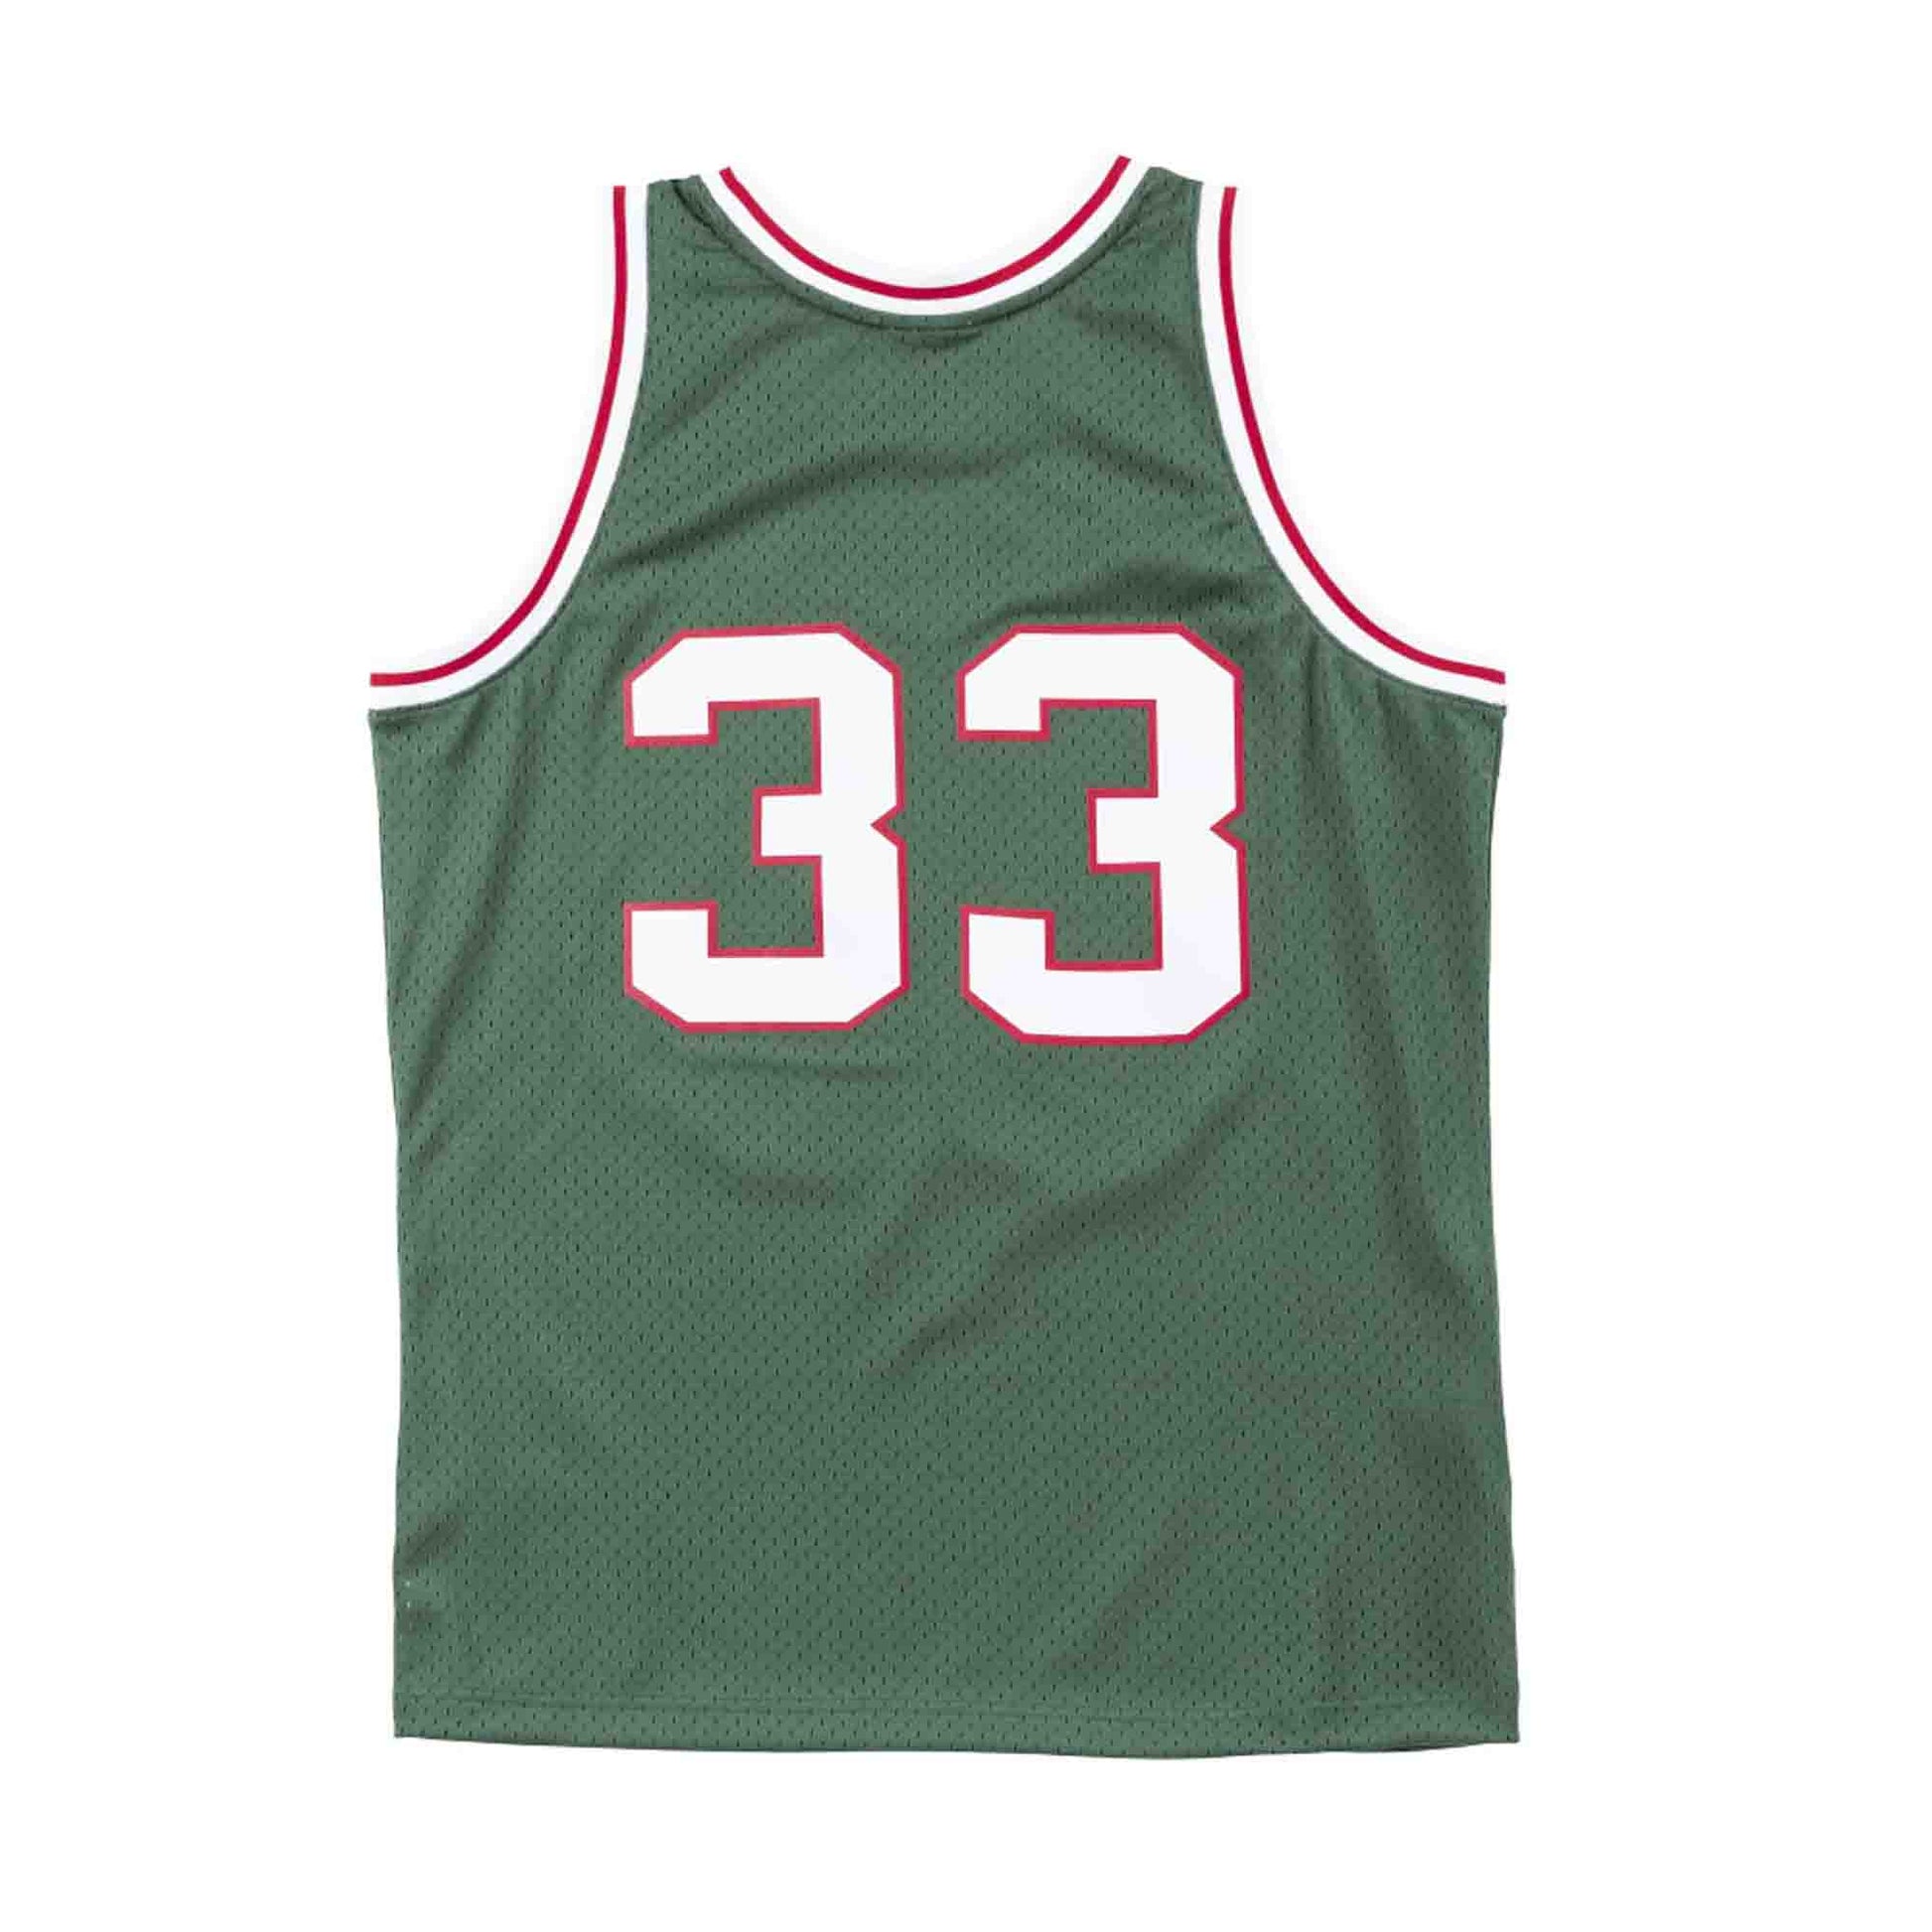 Jersey for the Milwaukee Bucks worn and signed by Kareem